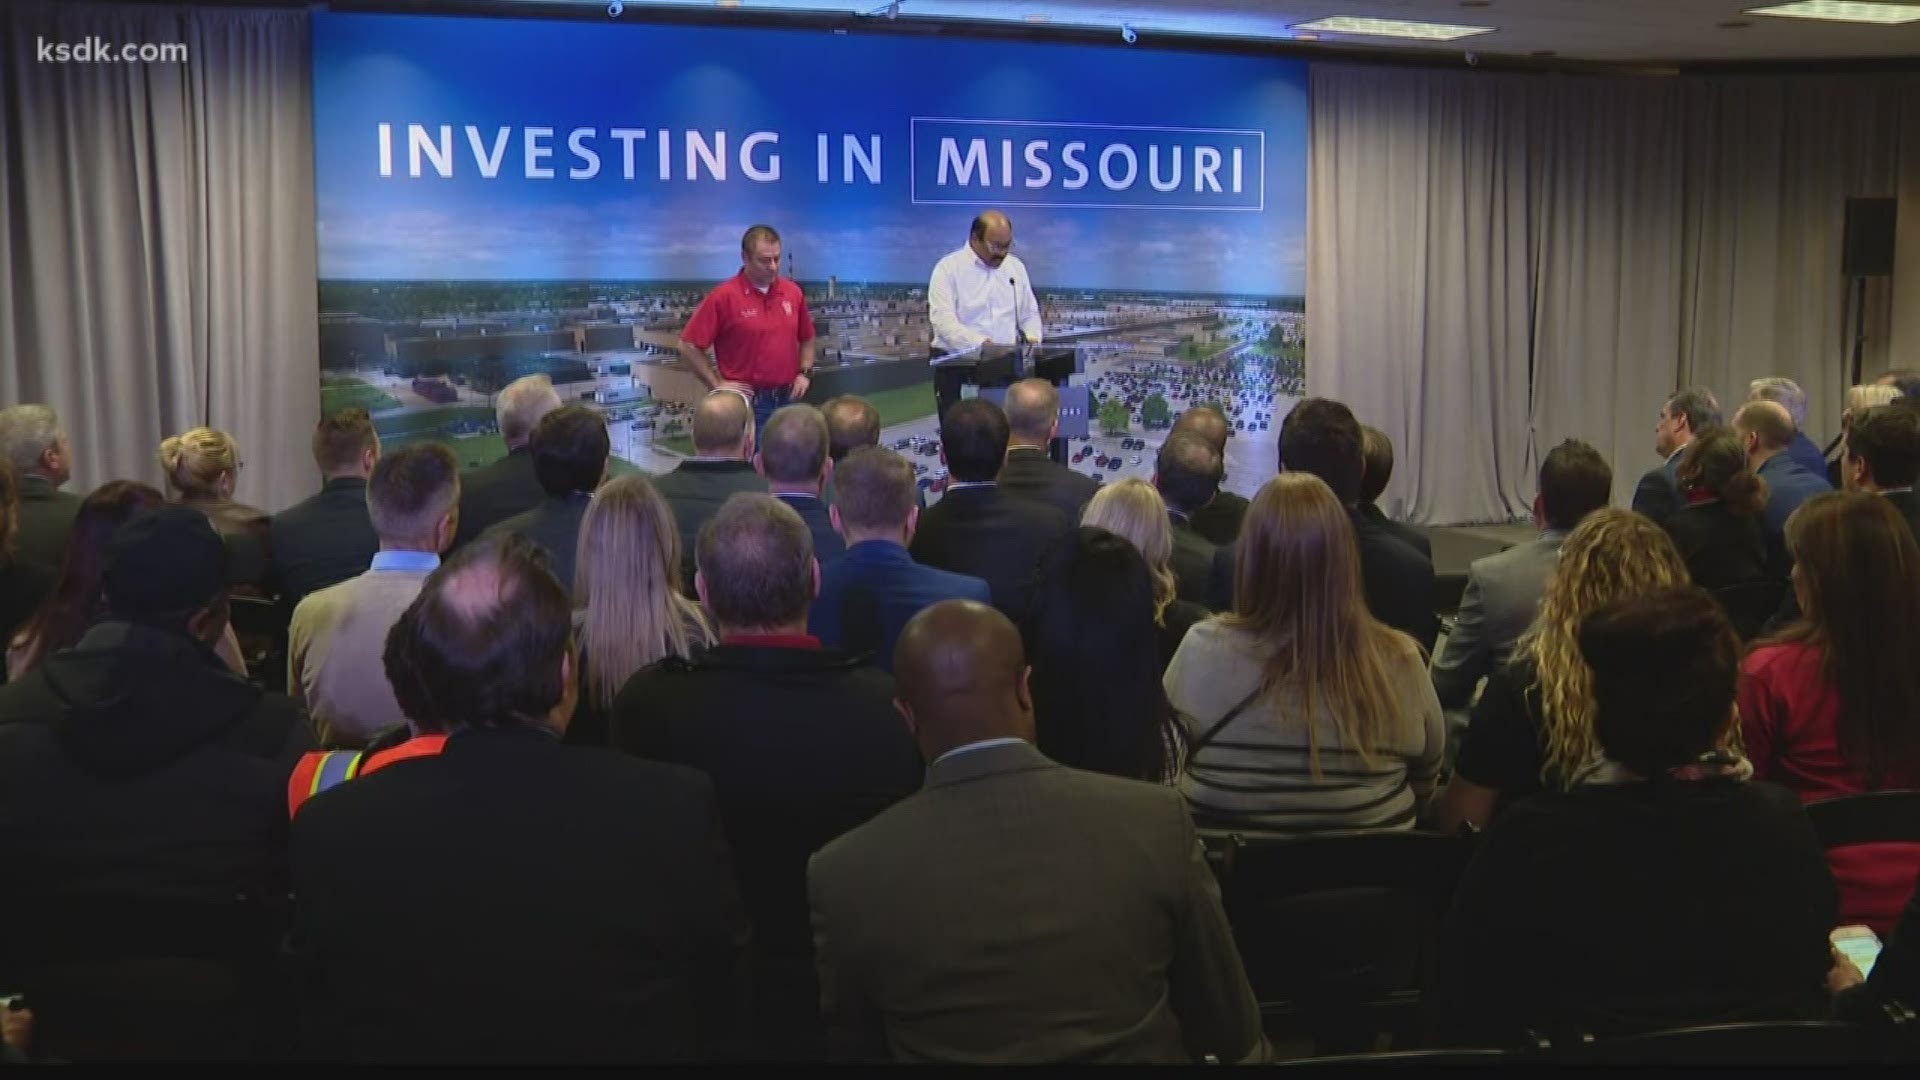 This is one of the largest single project investments from the private sector in Missouri, according to a press release.